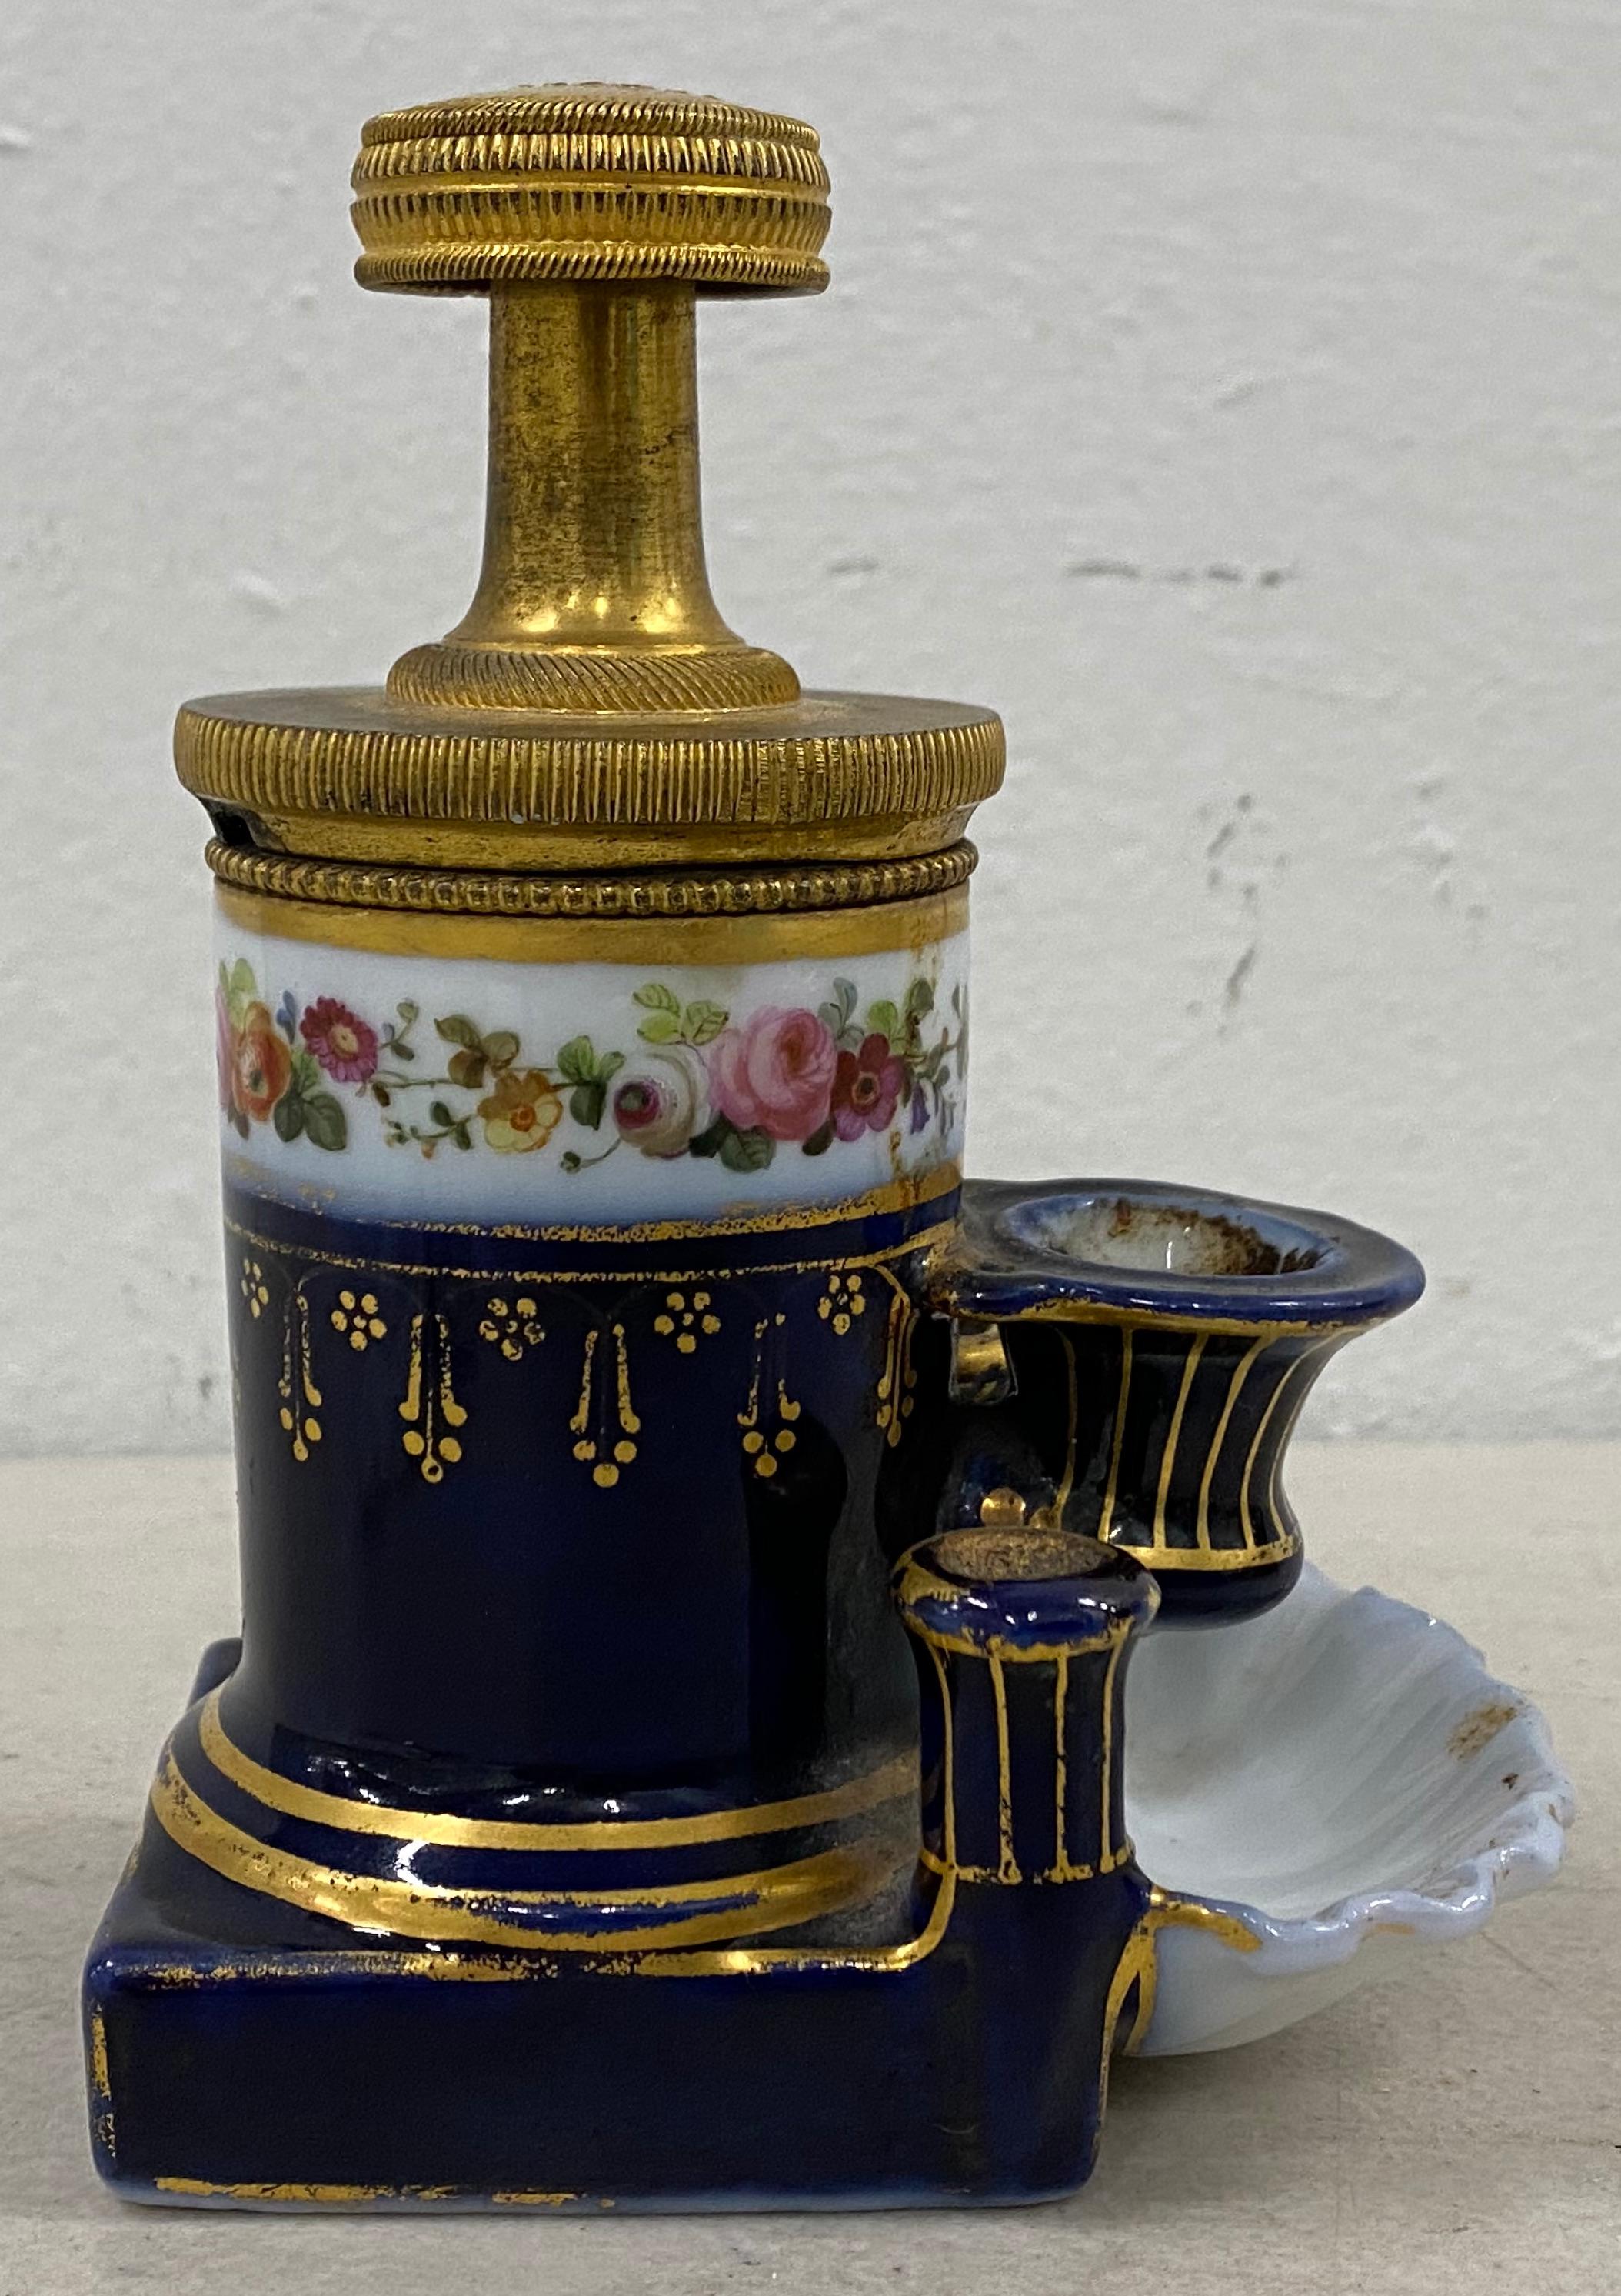 Early 19th century hand painted porcelain & brass inkwell, Paris 1839

A fine hand made porcelain inkwell by Medaille D'Argent

Hand painted floral motif surround the inkwell 

Two side by side quill holders 

The inkwell is designed to